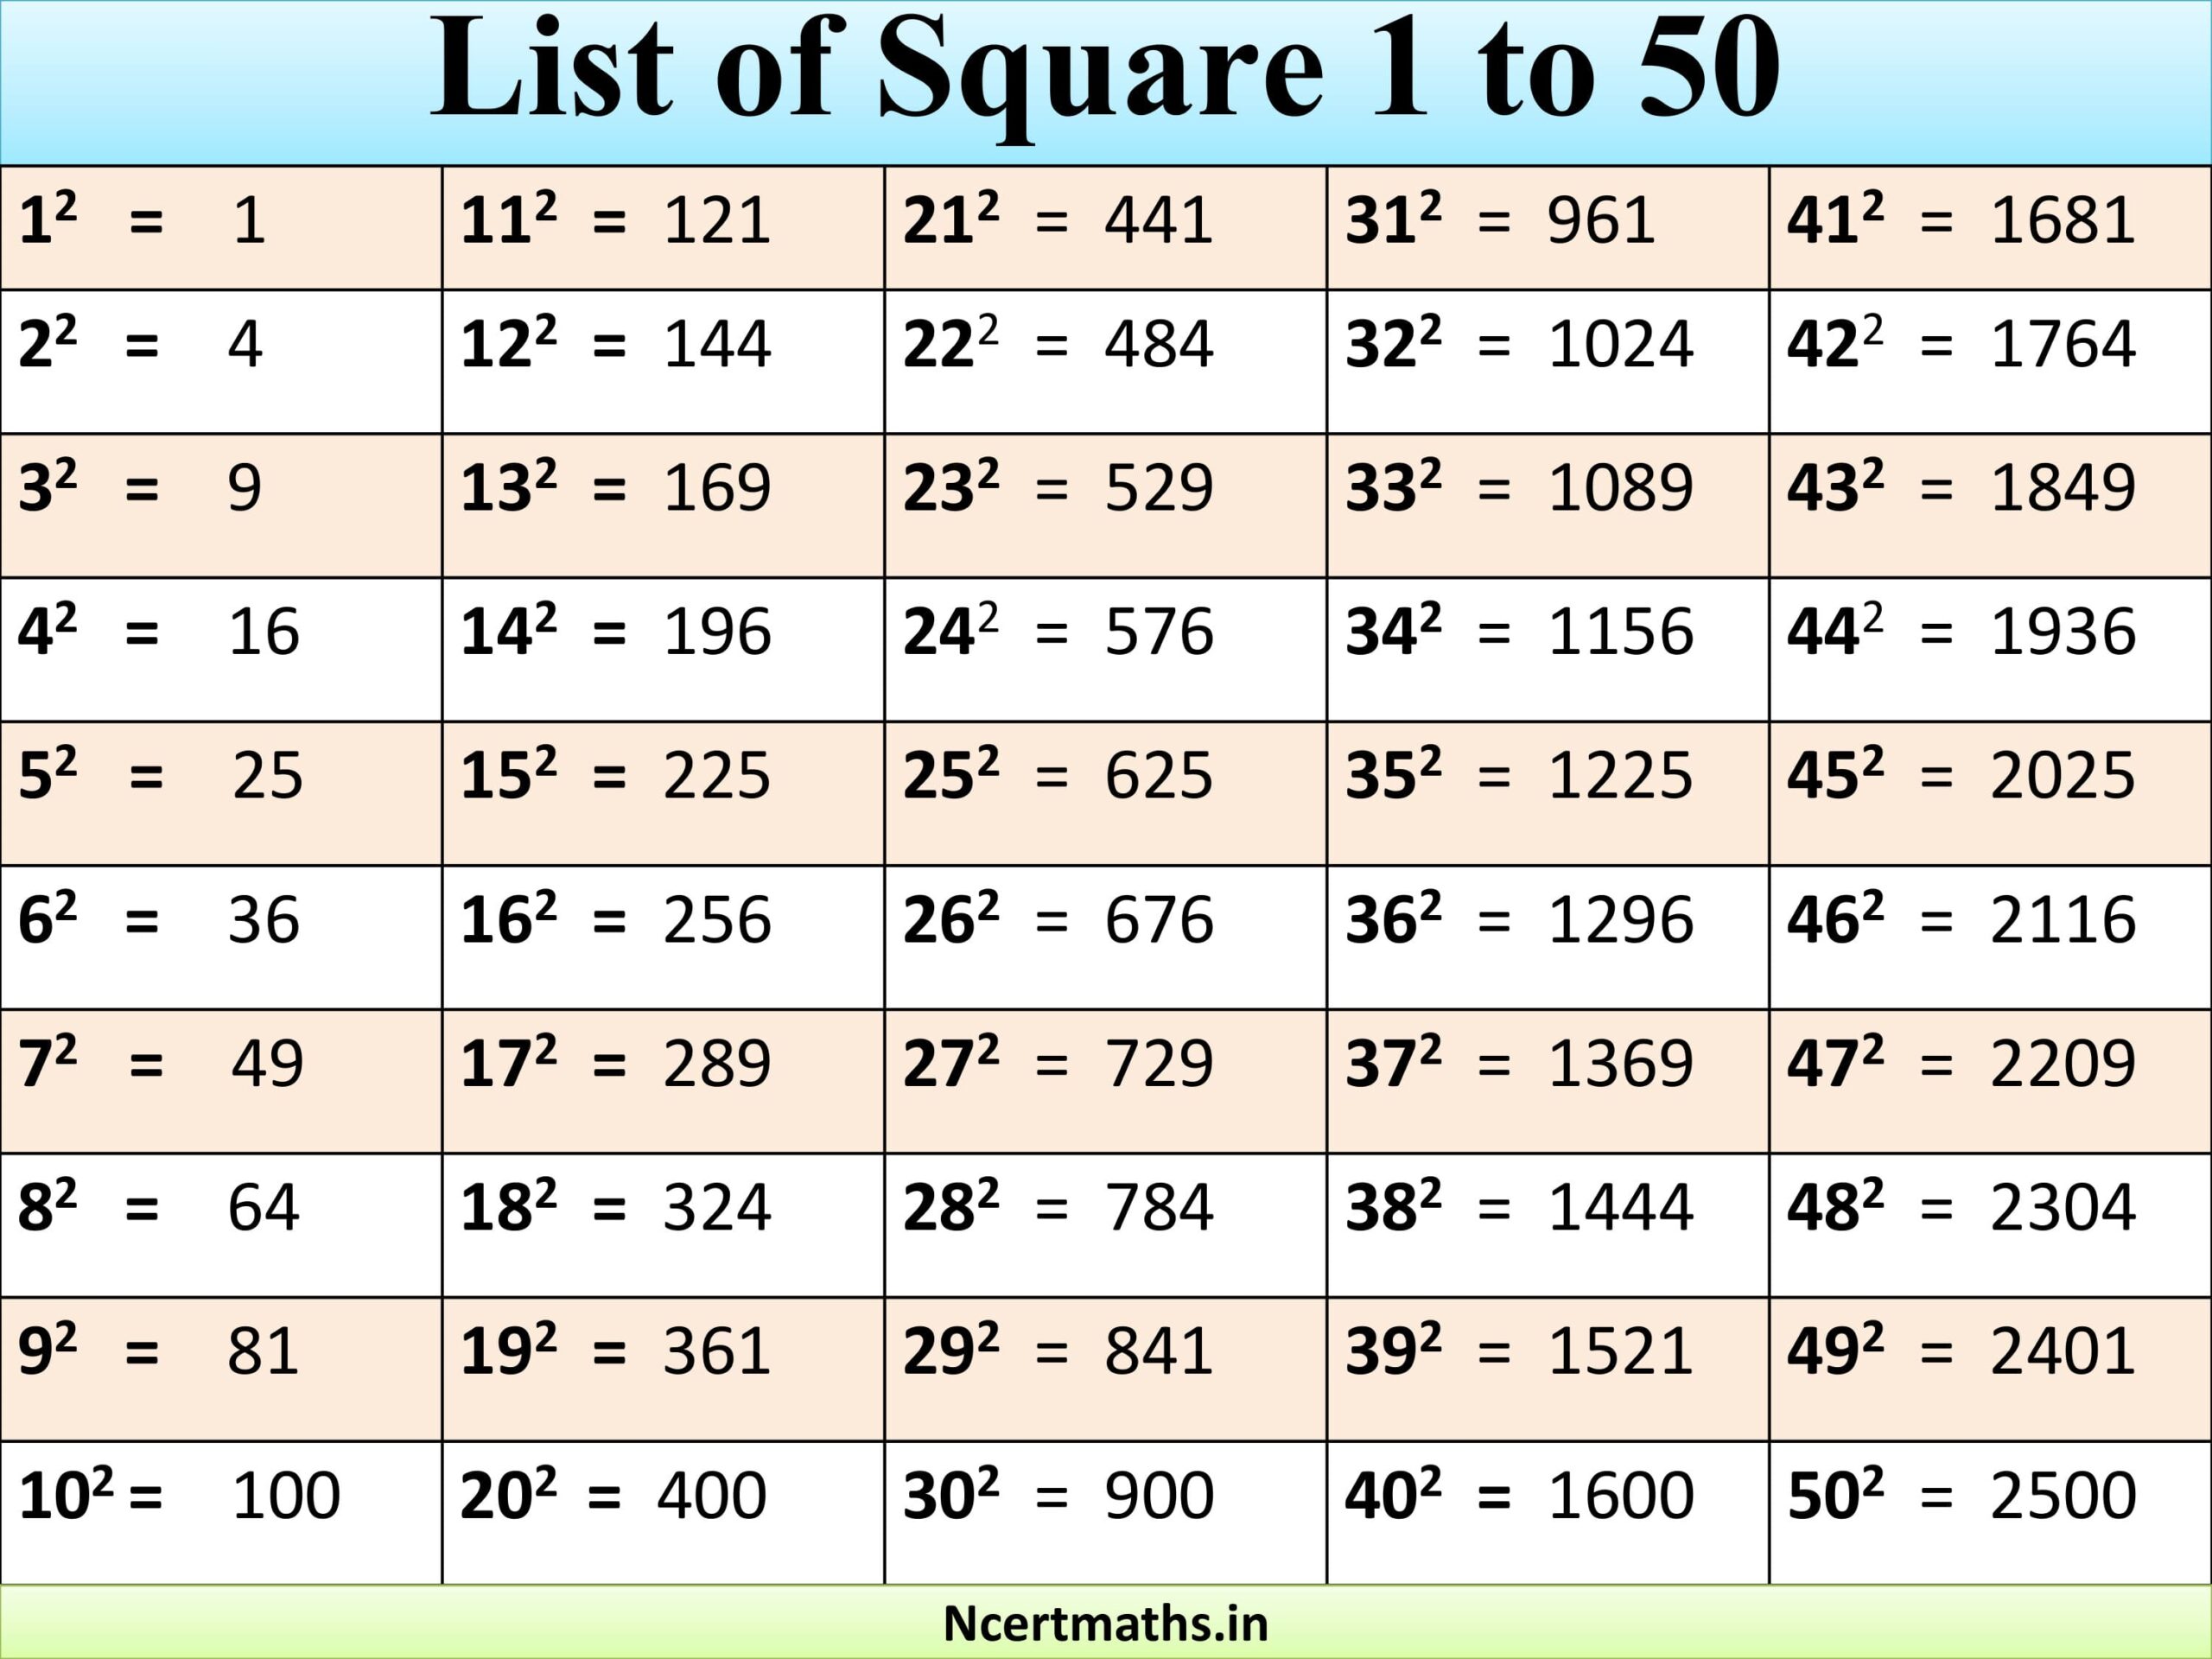 List of Square 1 to 50